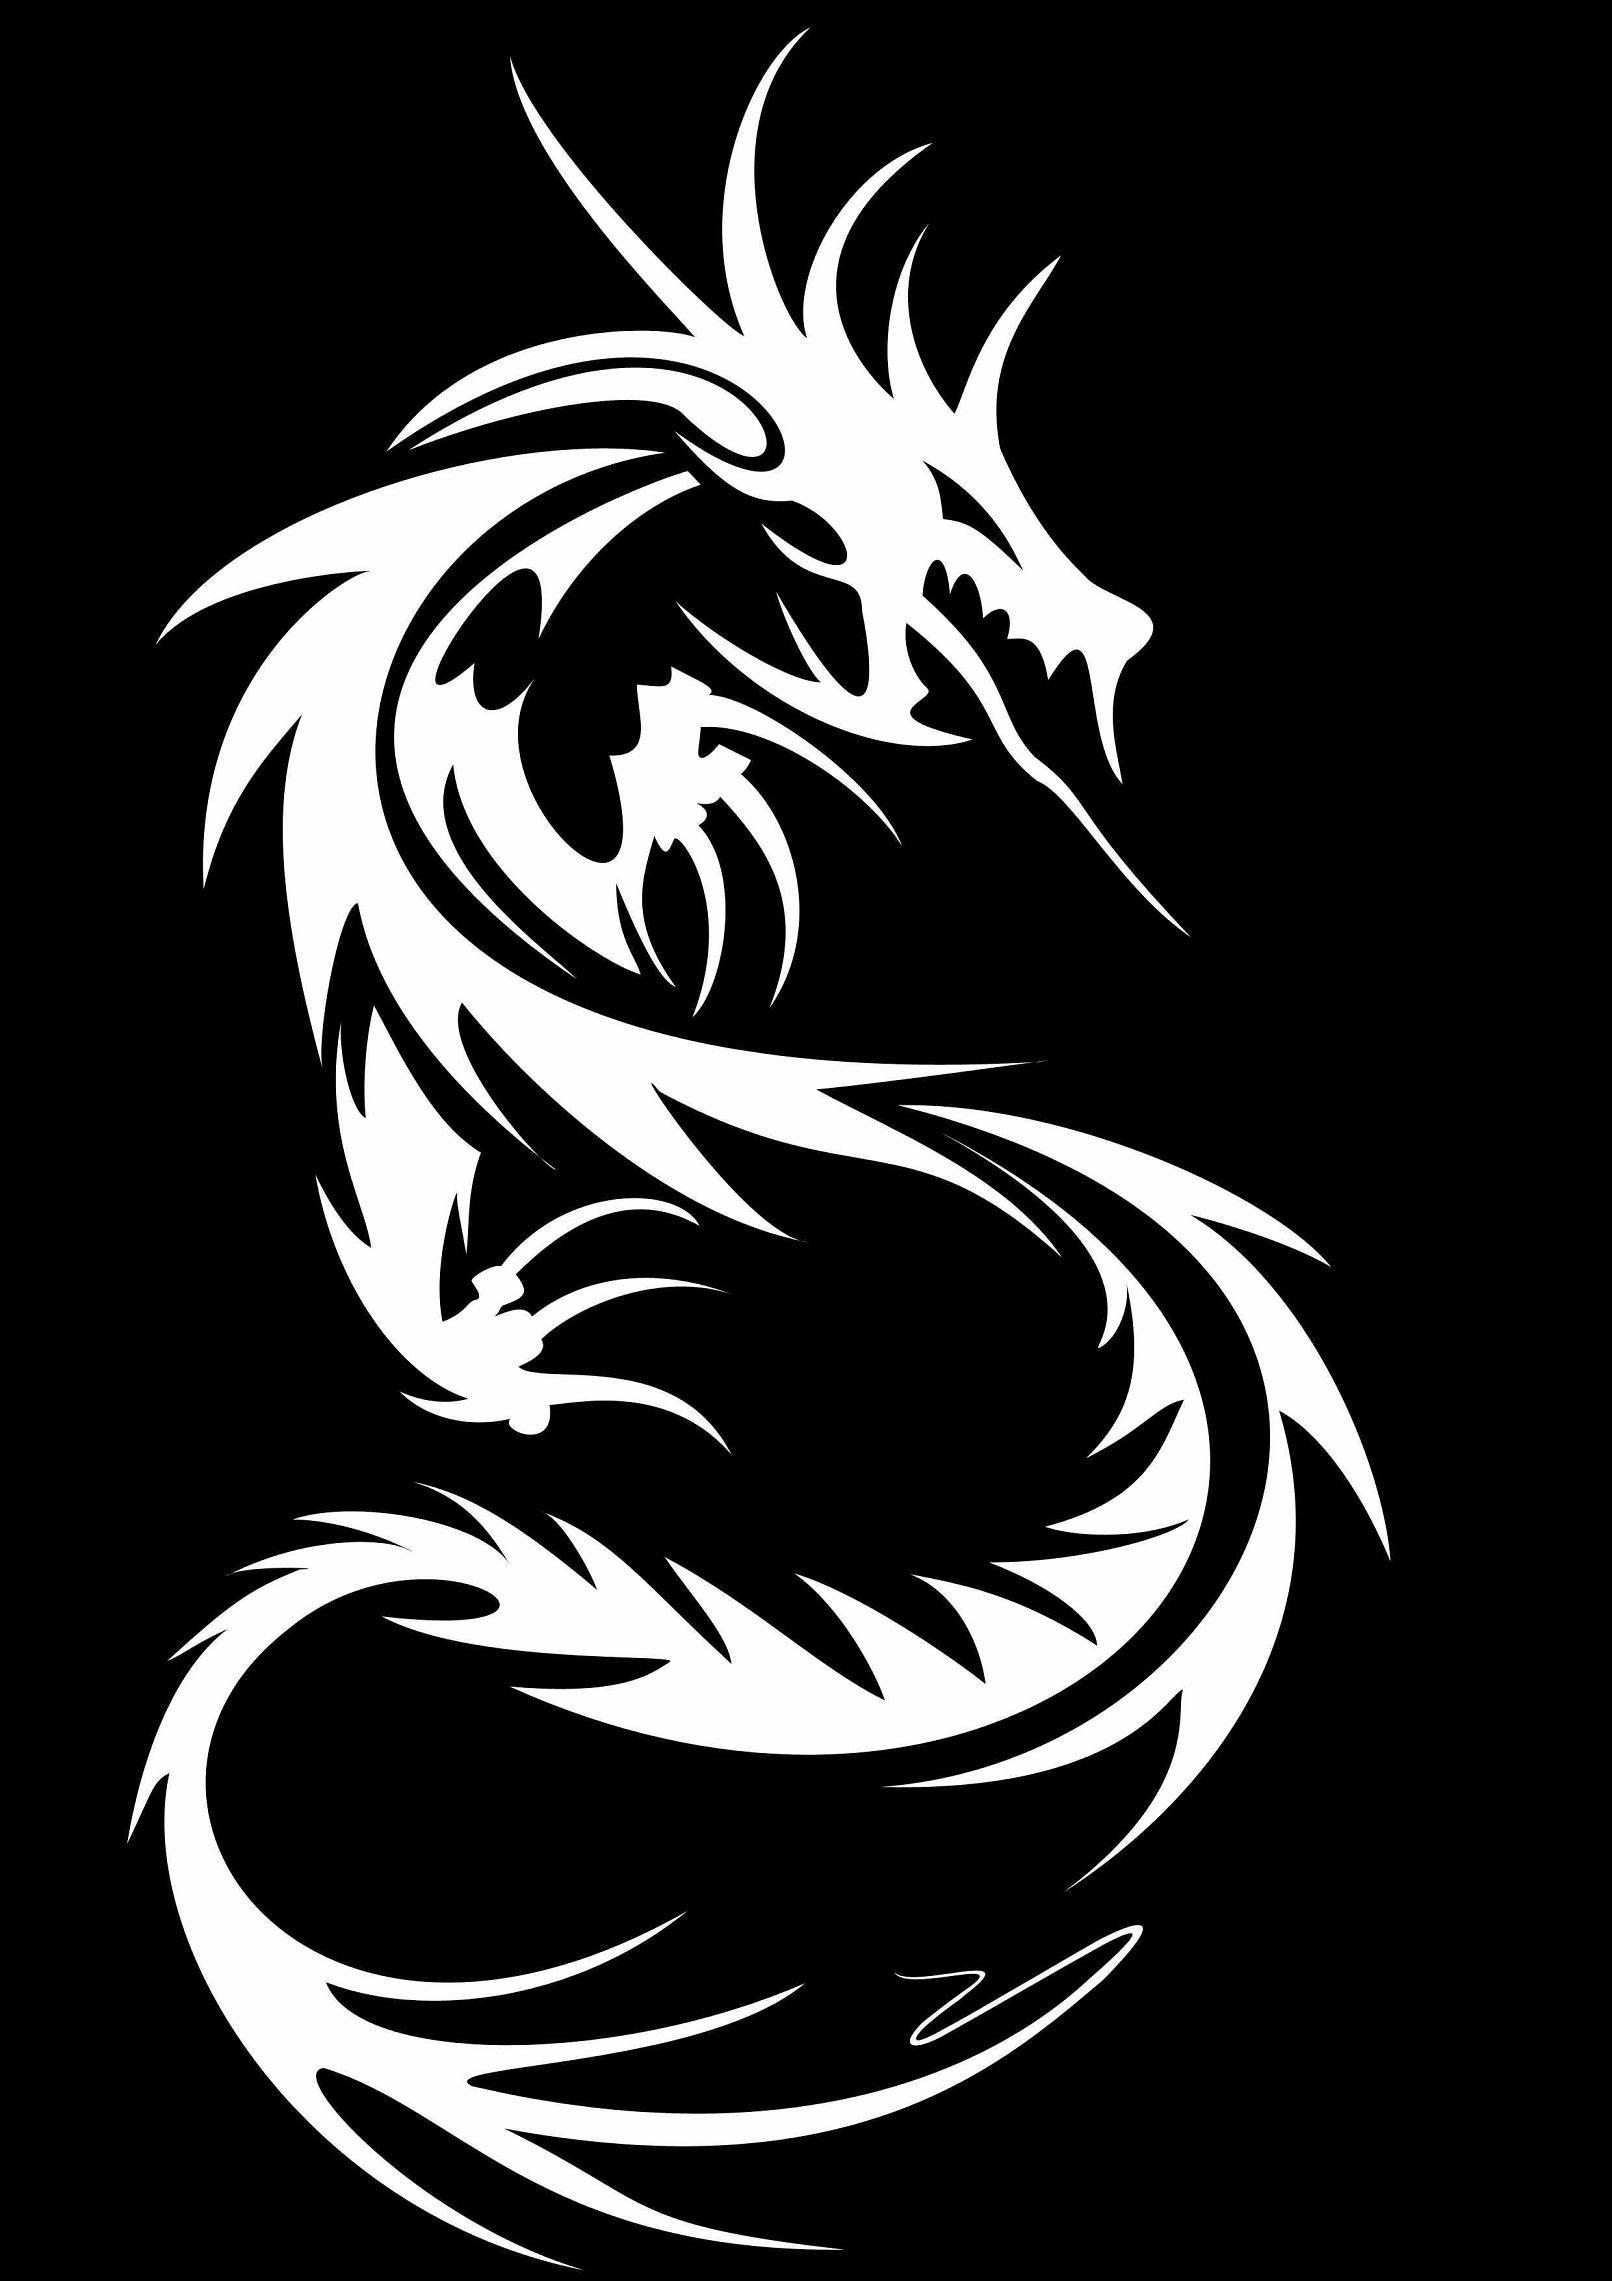 Black and White Dragon Wallpapers Top Free Black and White Dragon